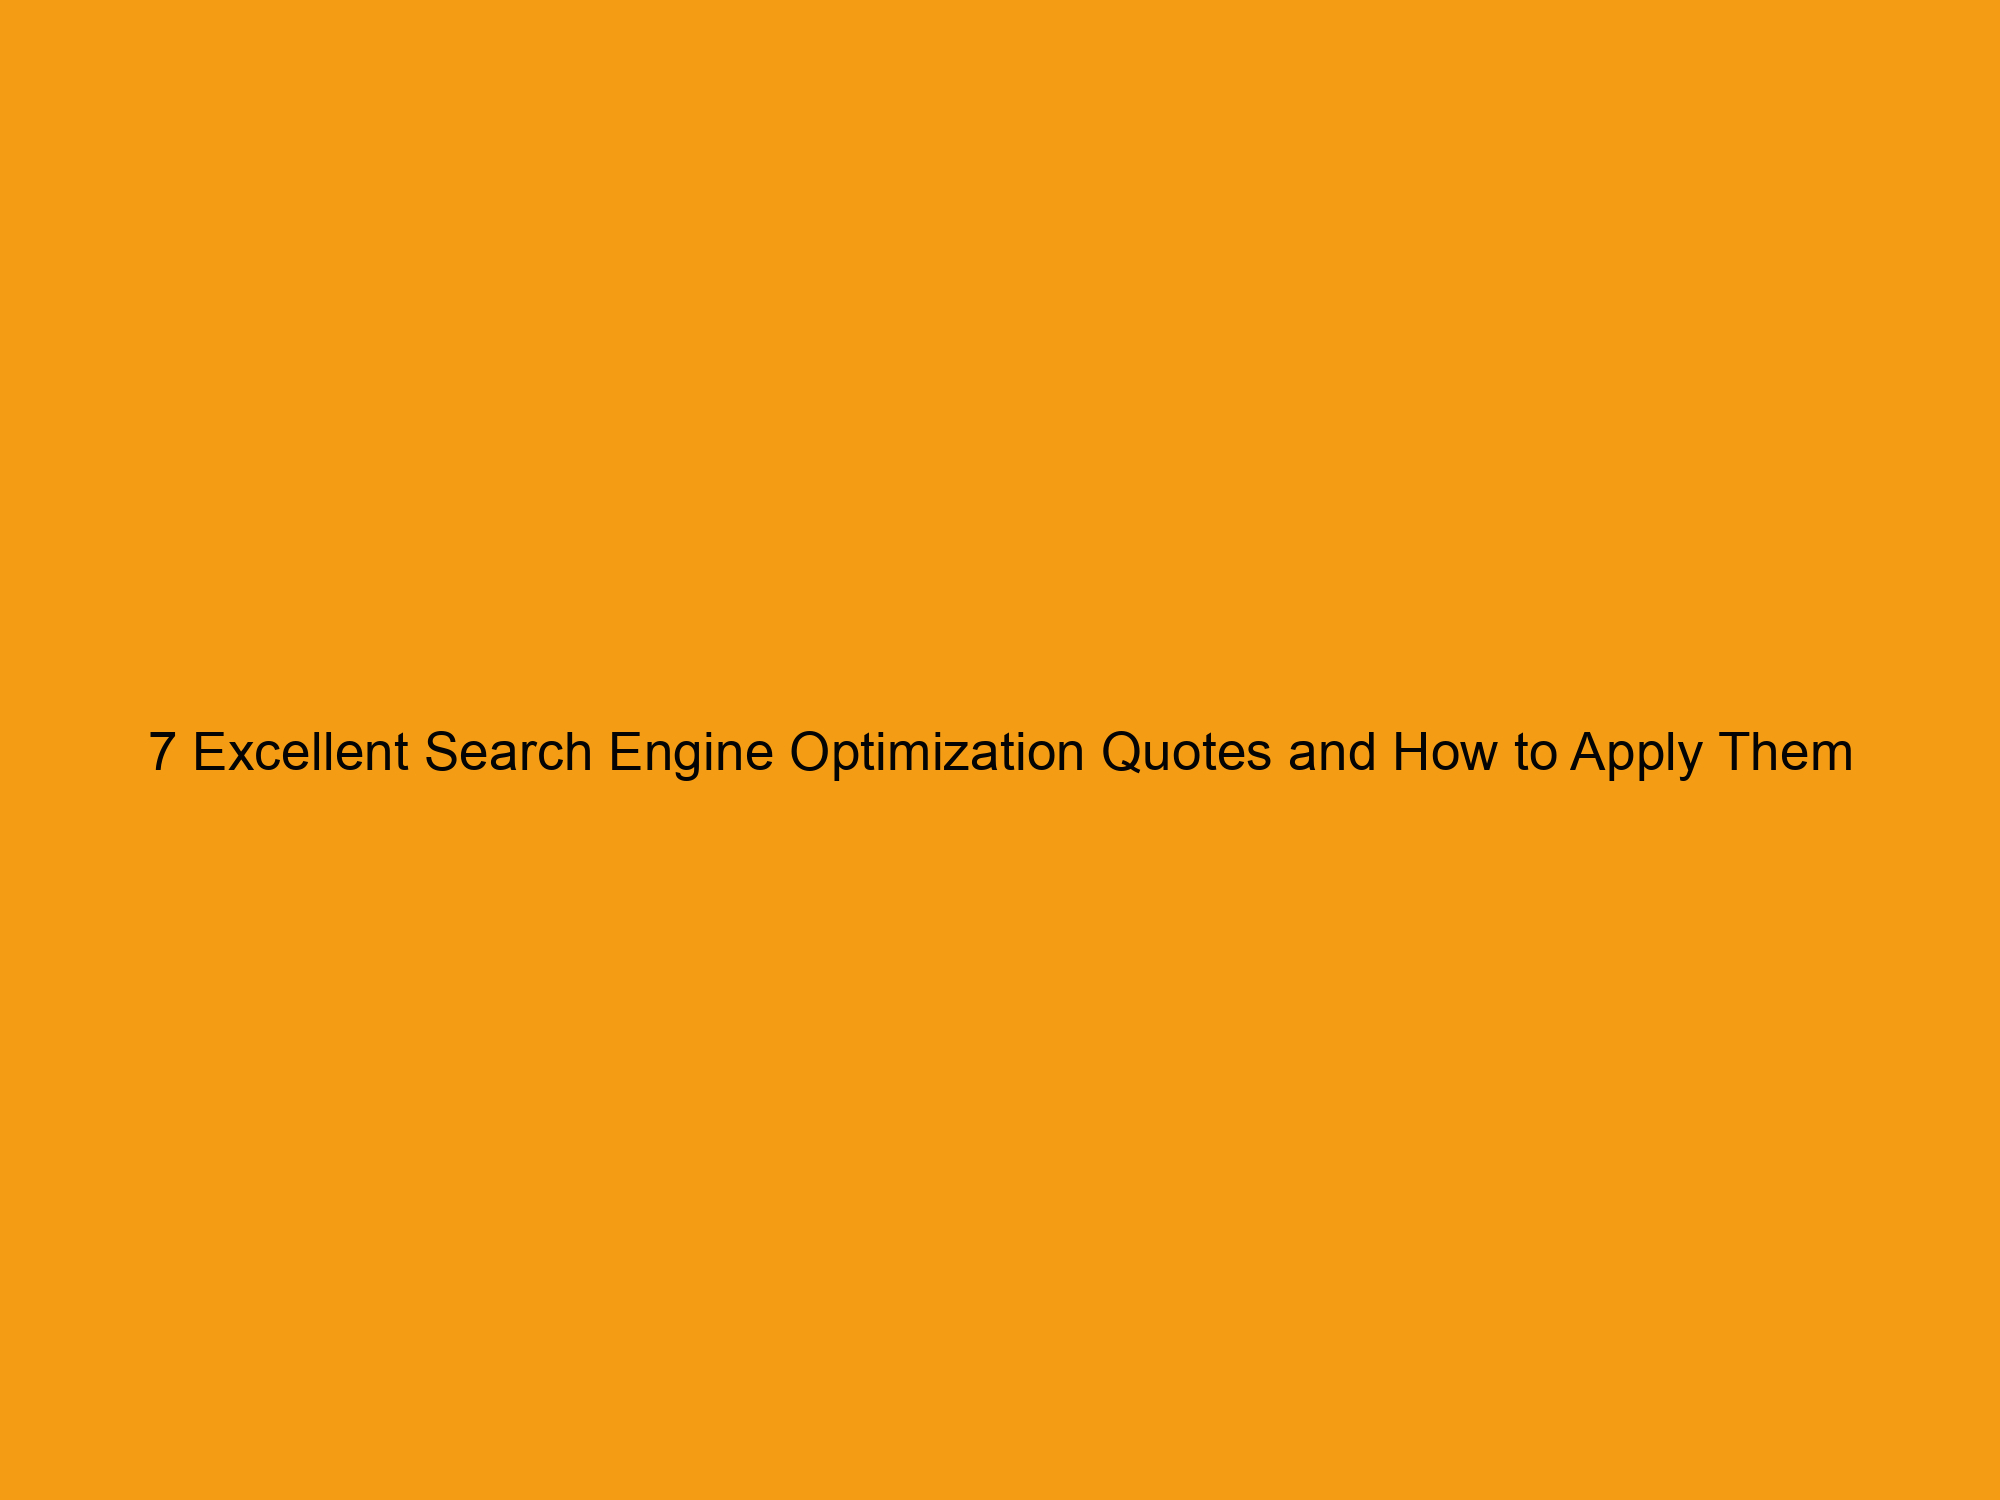 7 Excellent Search Engine Optimization Quotes and How to Apply Them